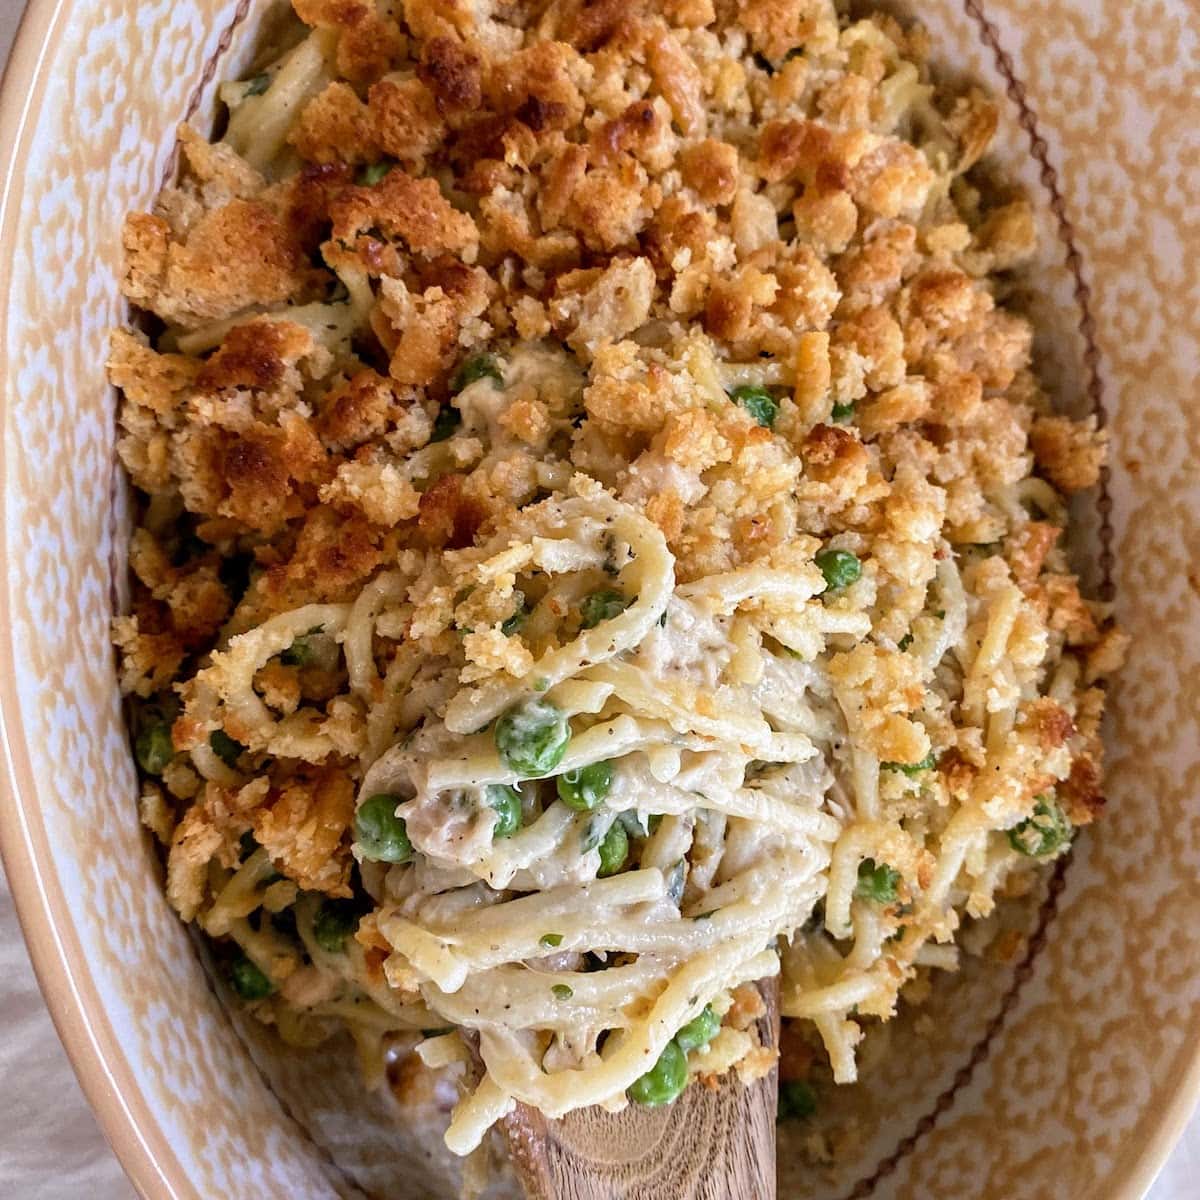 spaghetti tuna casserole topped with crushed crackers